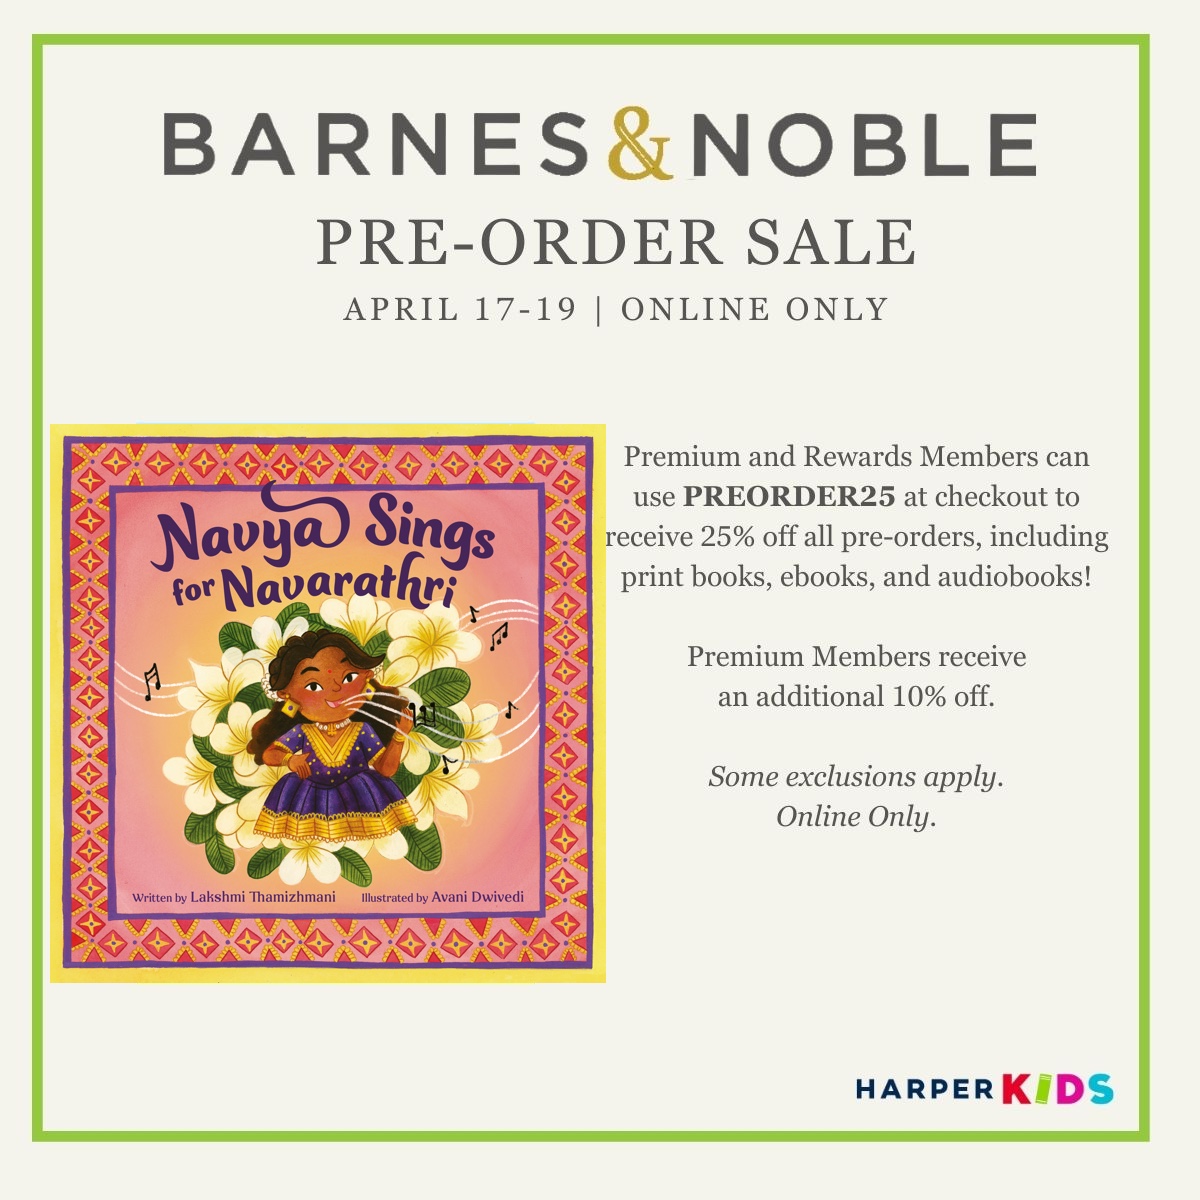 Check out the 25% off preorder sale from 4/17-4/19 for Barnes & Noble members! Just use the coupon code PREORDER25 at checkout. Pre-order your copy of Navya Sings for Navarathri now! tinyurl.com/mu76k9rt @harperkids @BNBuzz